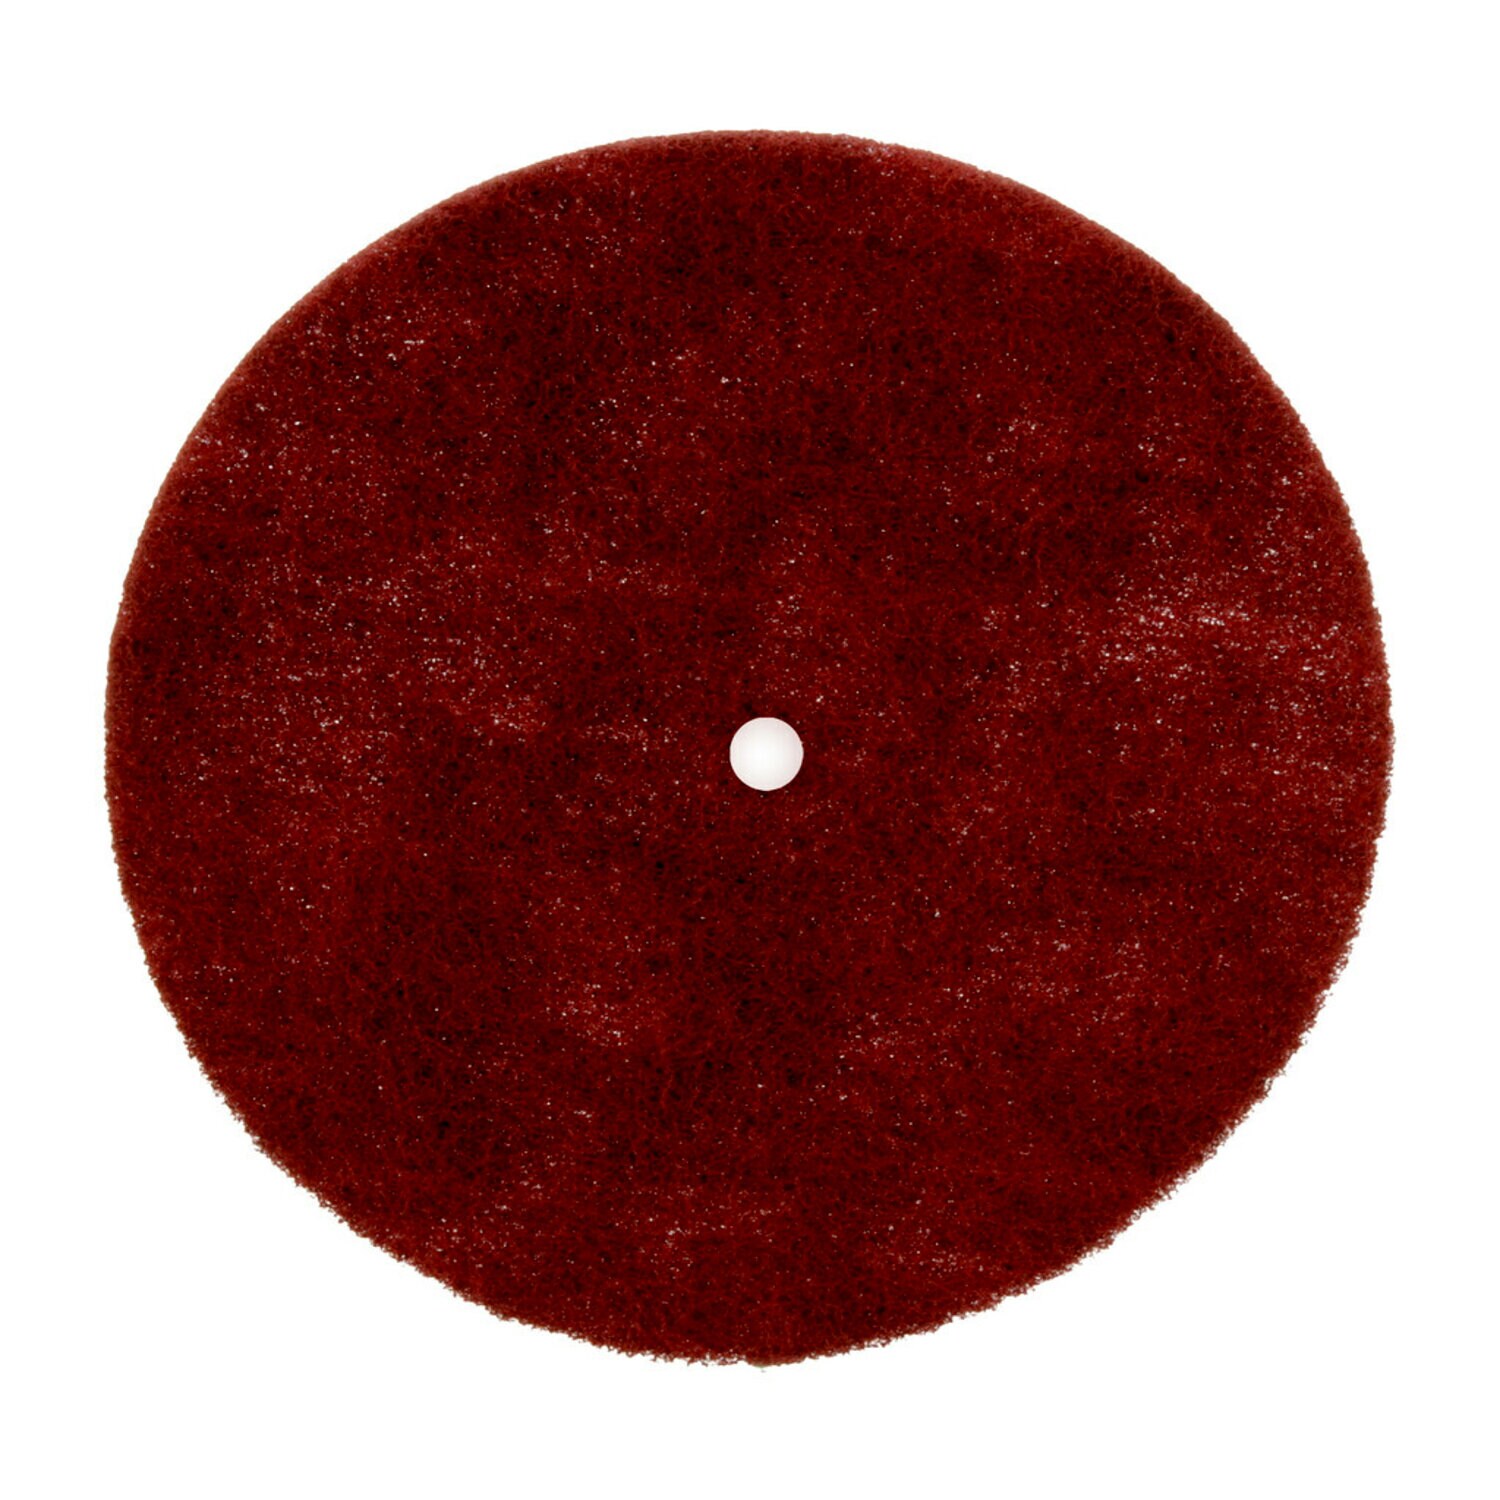 7000121902 - Standard Abrasives Buff and Blend HS Disc, 863708, 6 in x 1/4 in A VFN,
10/Pac, 100 ea/Case